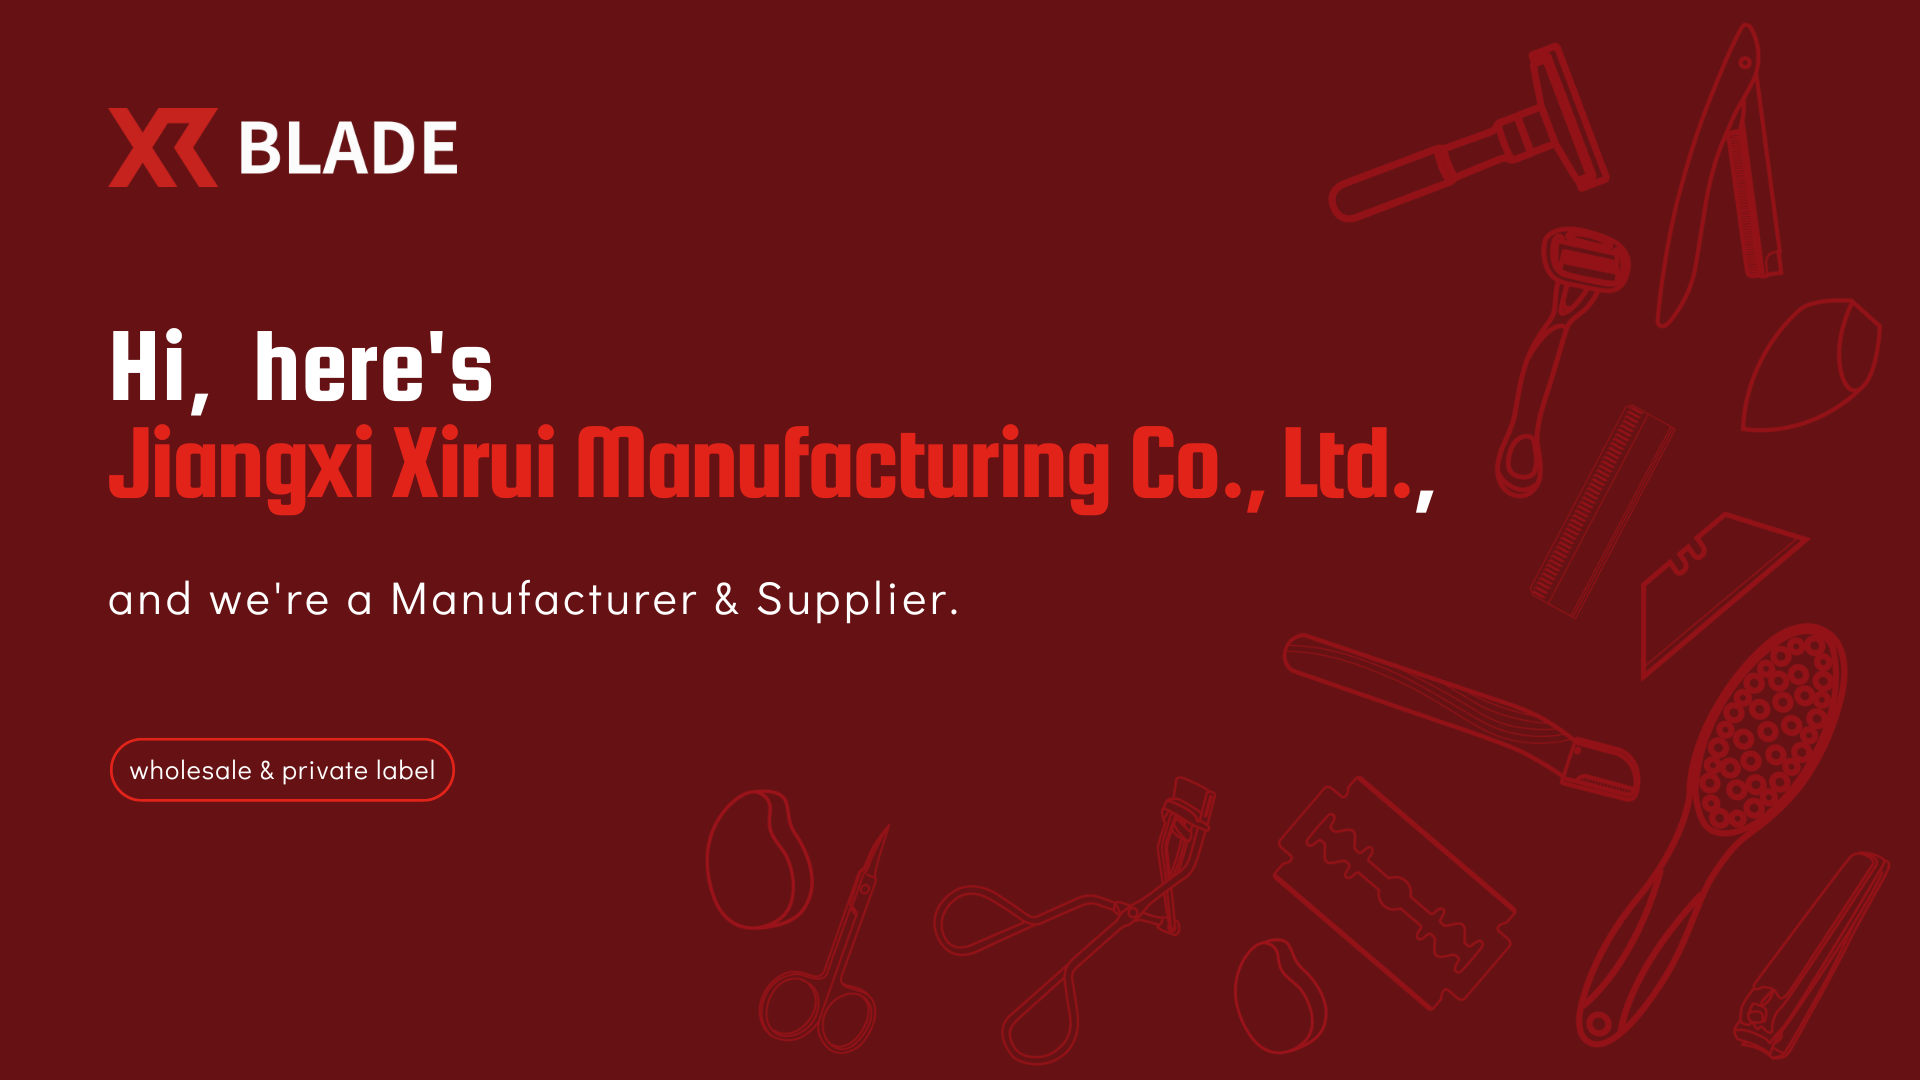 A Picture Announces Official Company Name Change to Jiangxi Xirui Manufacturing Co., Ltd.